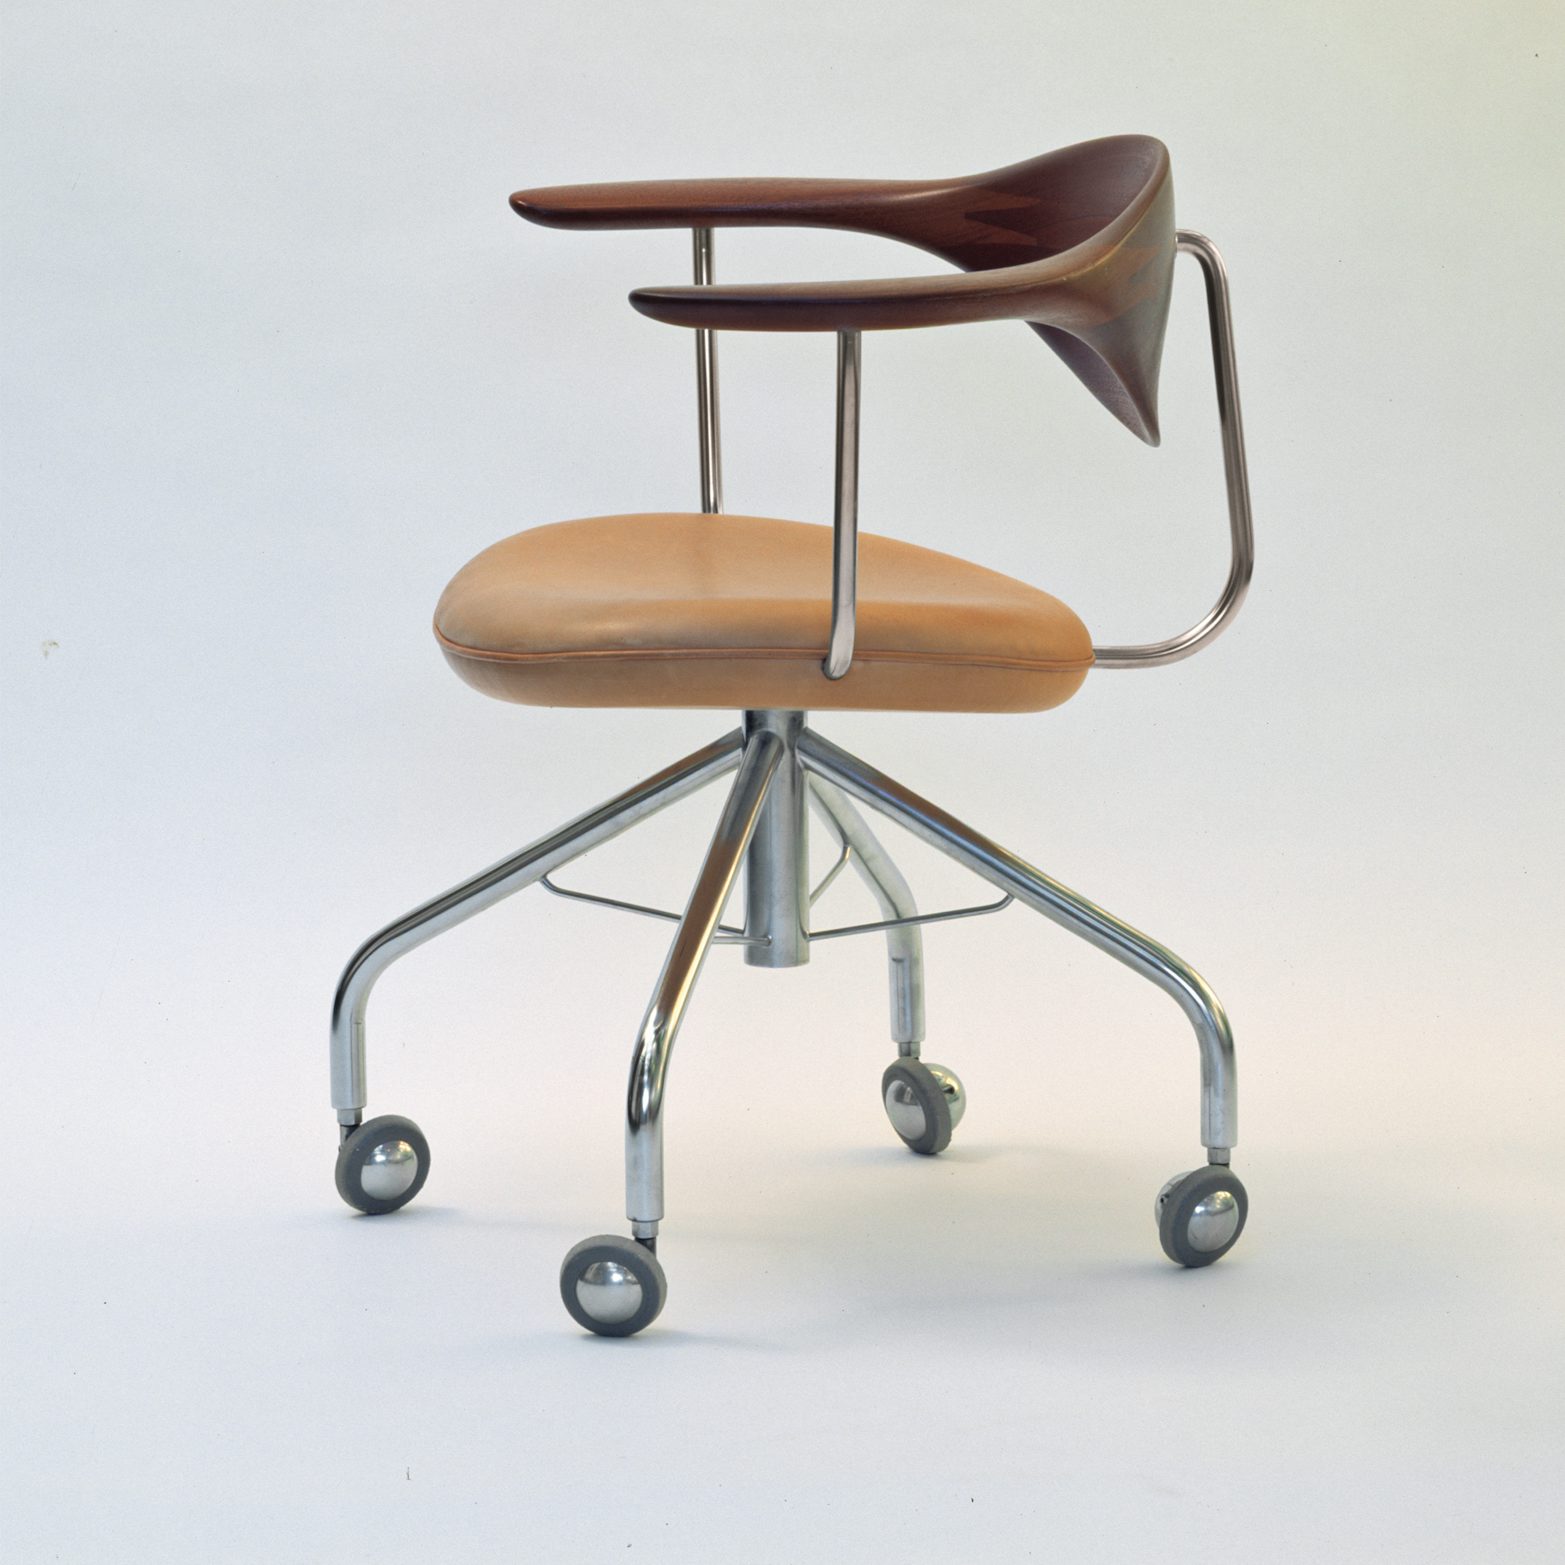 PP Mobler PP502 Swivel Chair Context Gallery 21